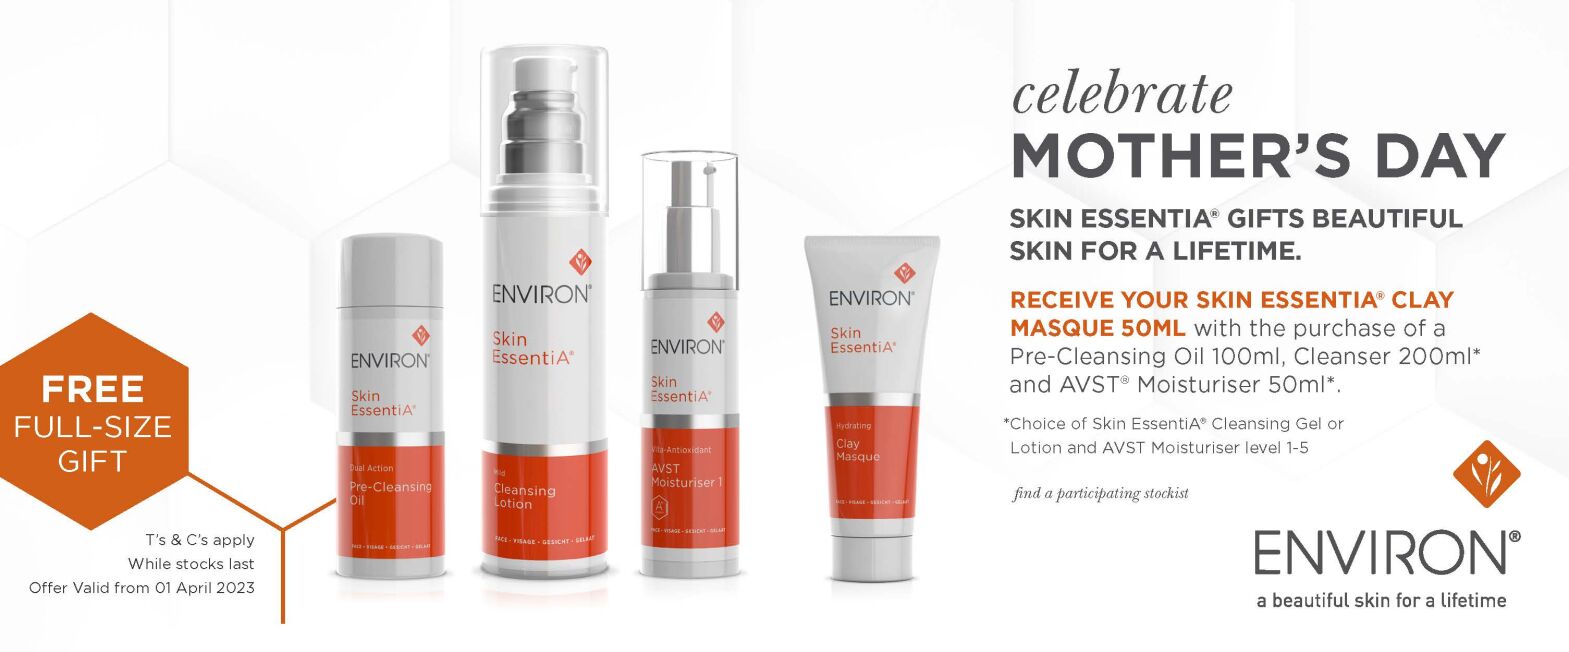 Environ Mother's Day SE Gift set